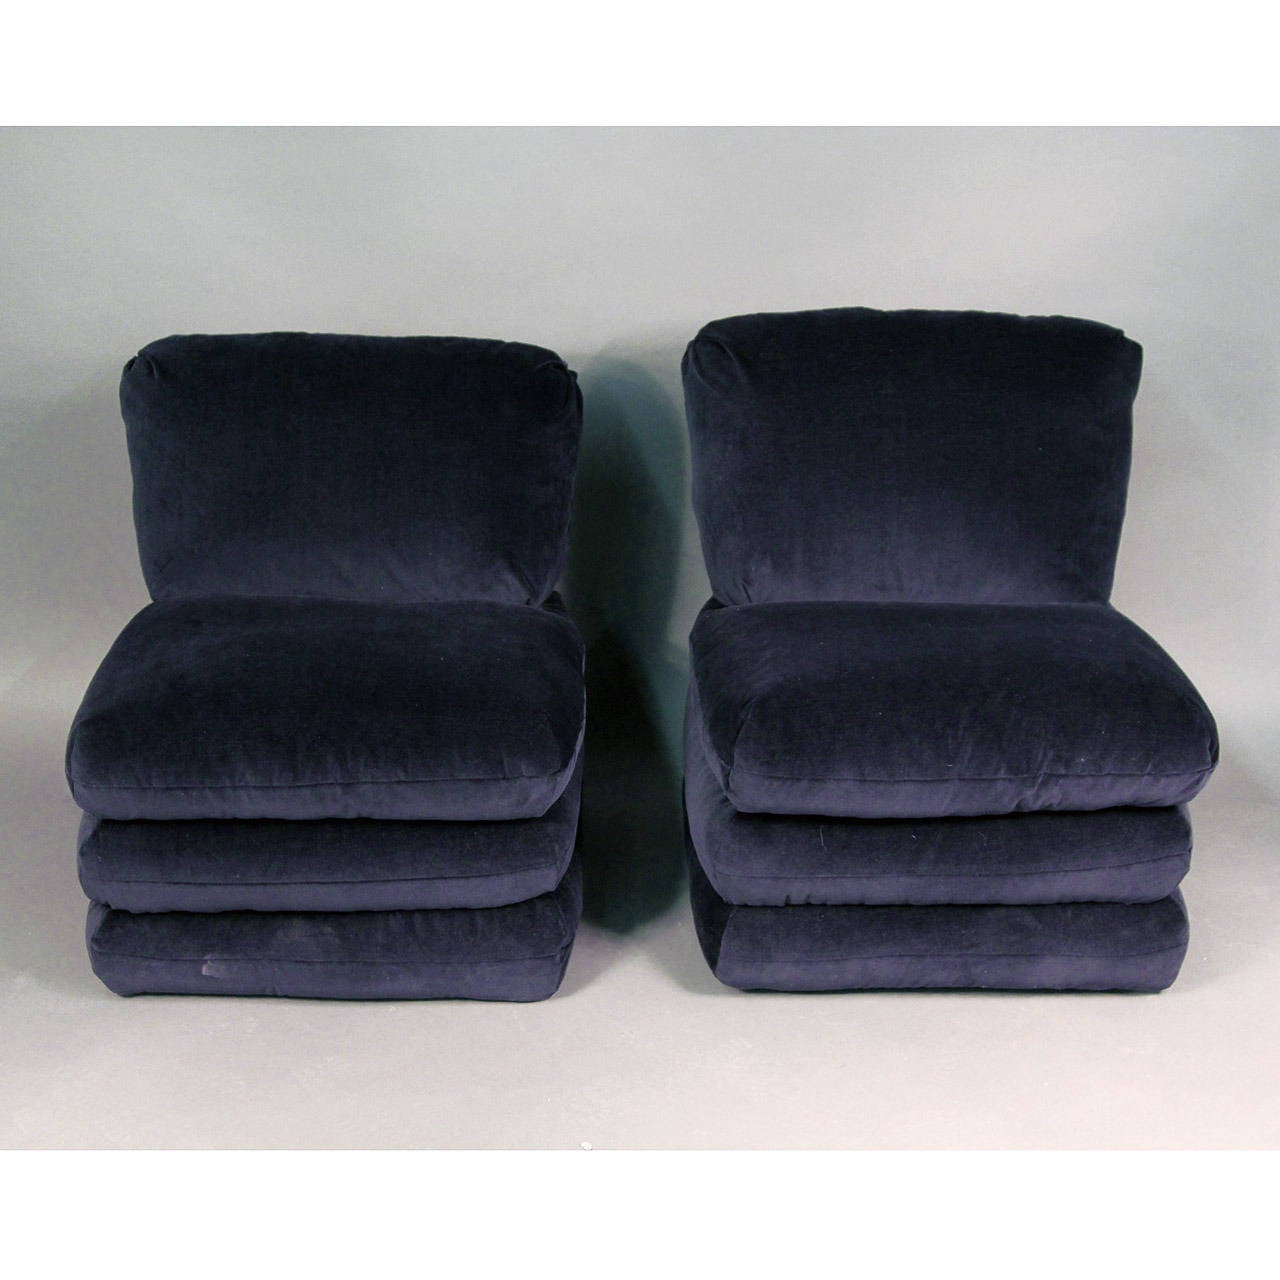 Absolutely stunning pair of navy velvet slipper chairs, early Donghia design for Vice Versa. Original tag intact on base. Unusual and rare shape, in excellent newly reupholstered condition (in plush Stark cotton velvet).